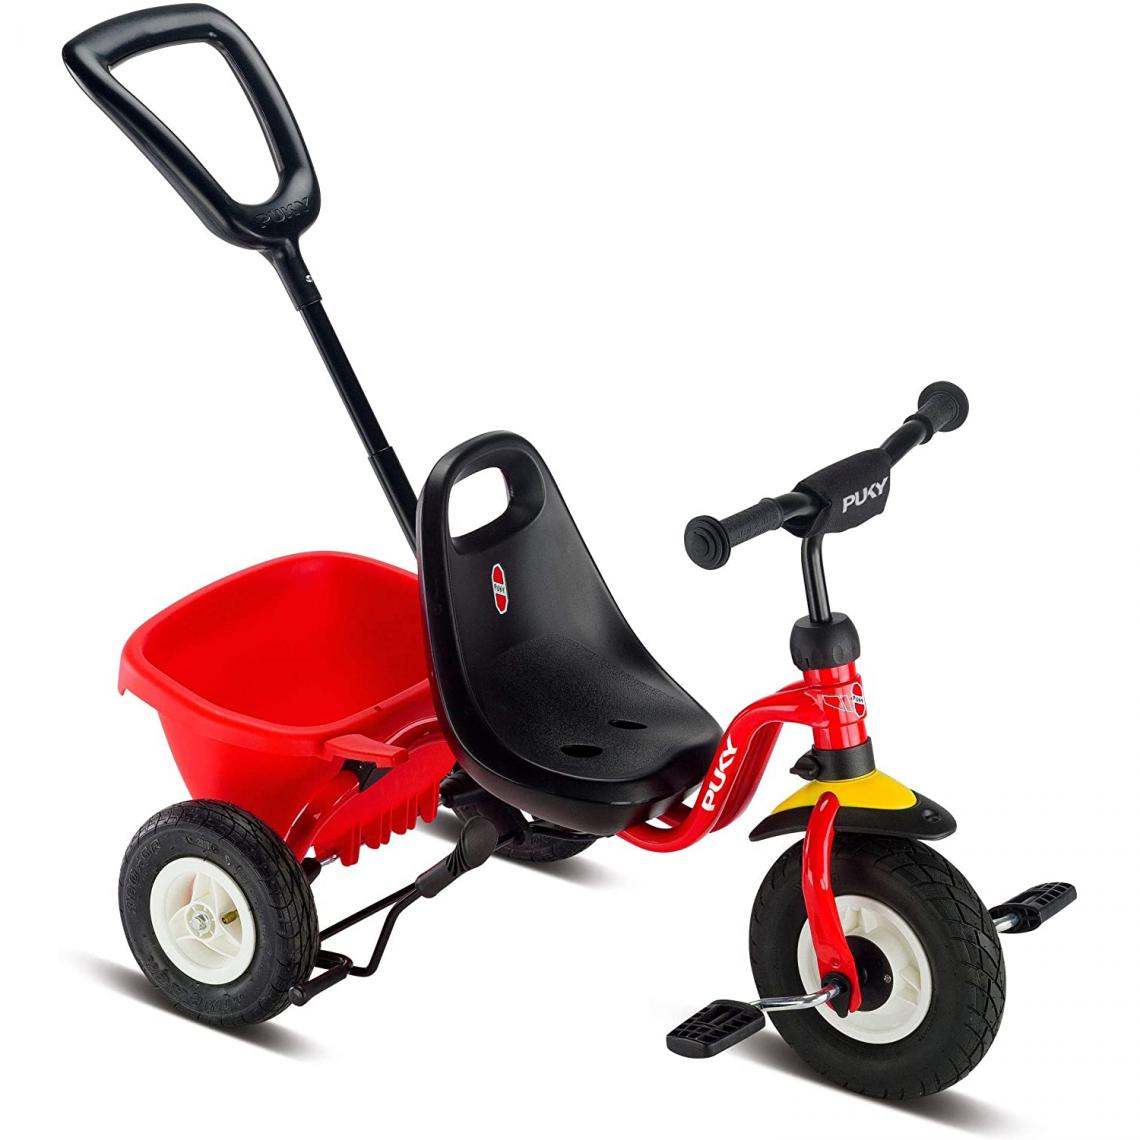 PUKY - Puky 2375 - Tricycle enfant Ceety Air, roues gonflables, rouge - Tricycle